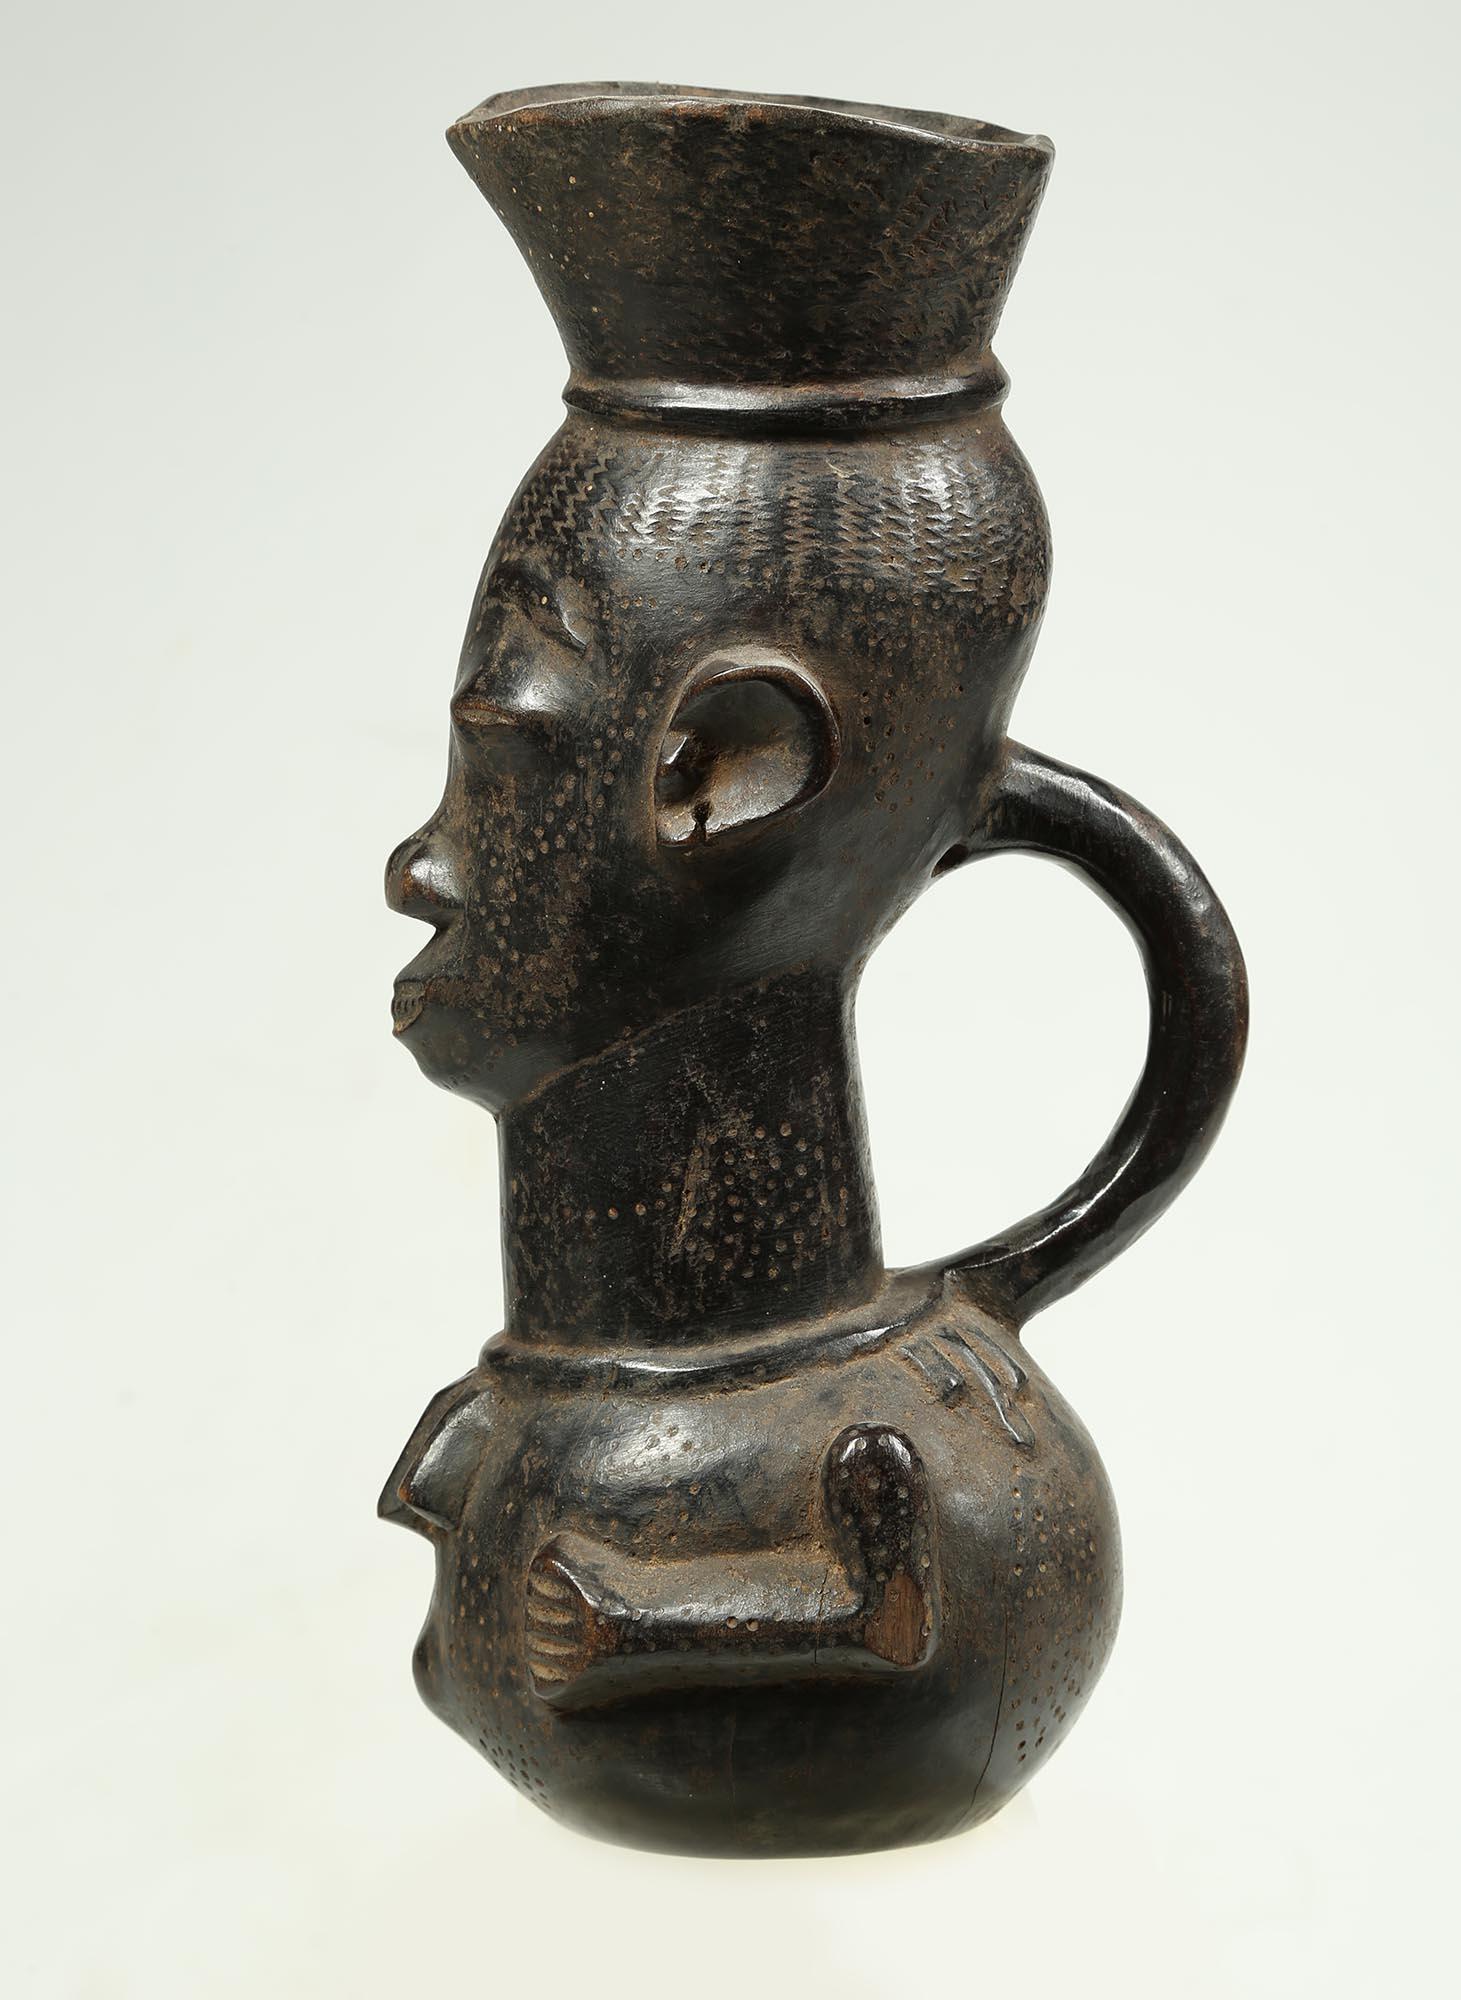 A tall Kuba palm wine cup of carved wood with large face and stylized body with hands of chest, handle and spouted top. 12 1/2 inches high, old stable repair to lip. Expressive face with wonderful expression. Kuba cups were items of high prestige